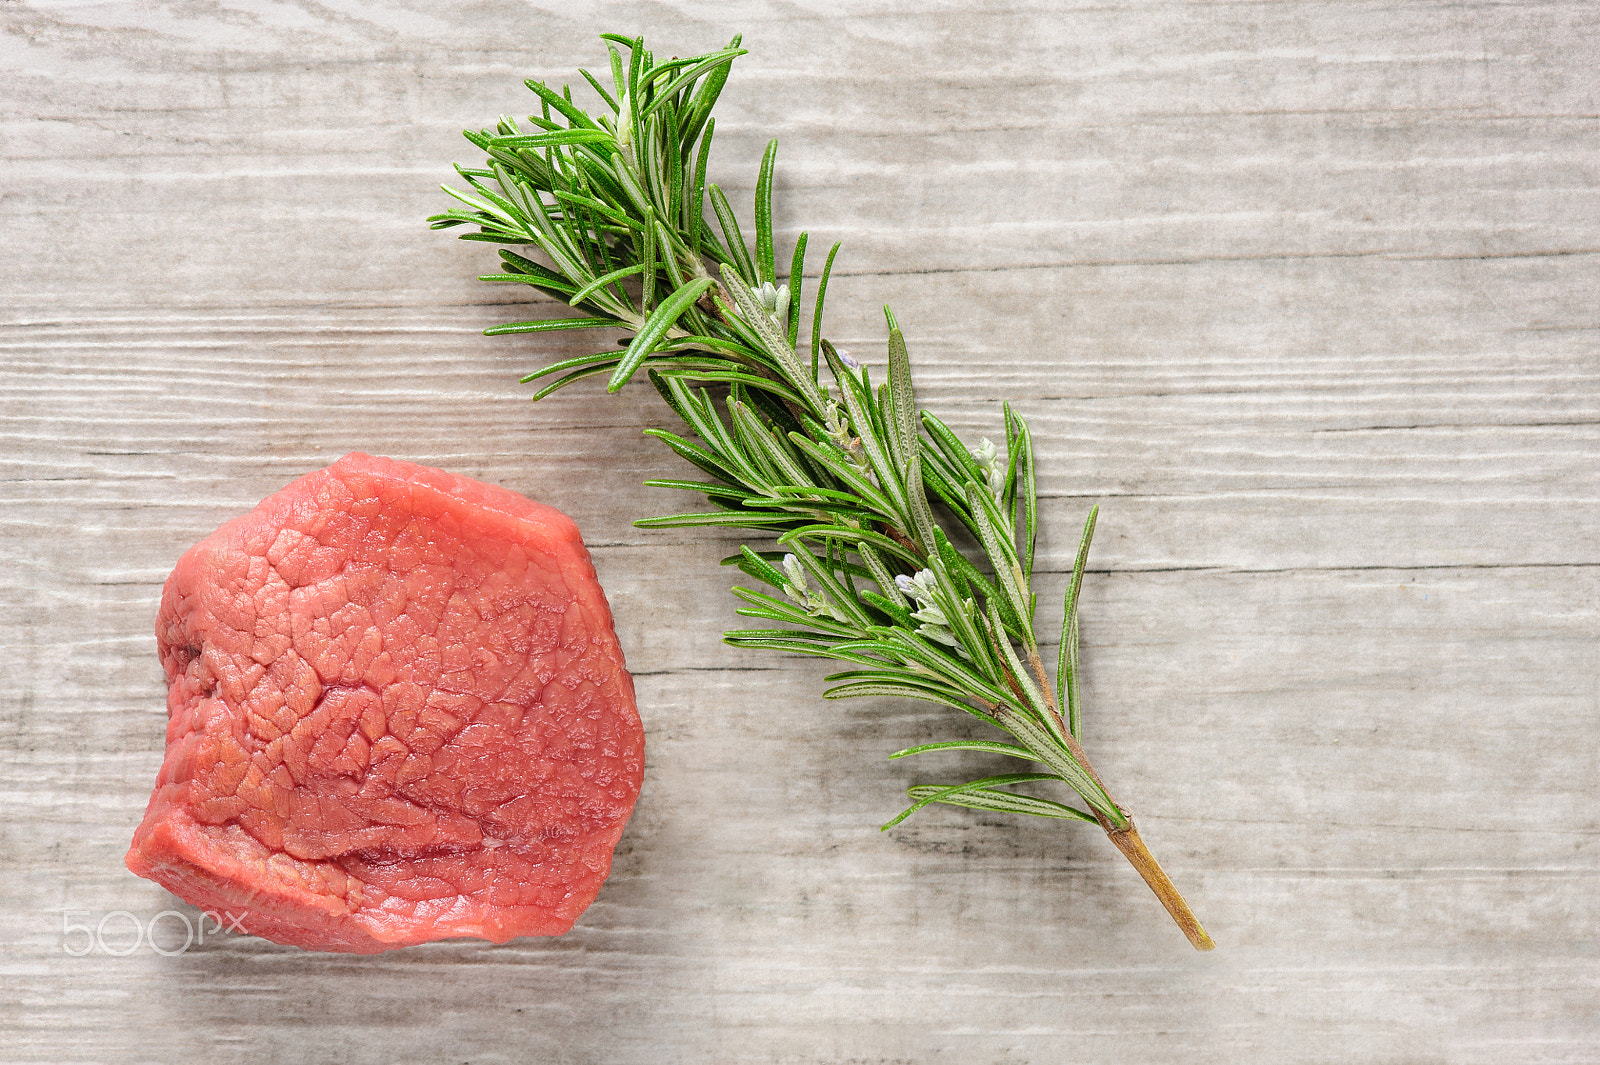 Nikon D700 sample photo. Beef meat and rosemary on white wood or stone background photography